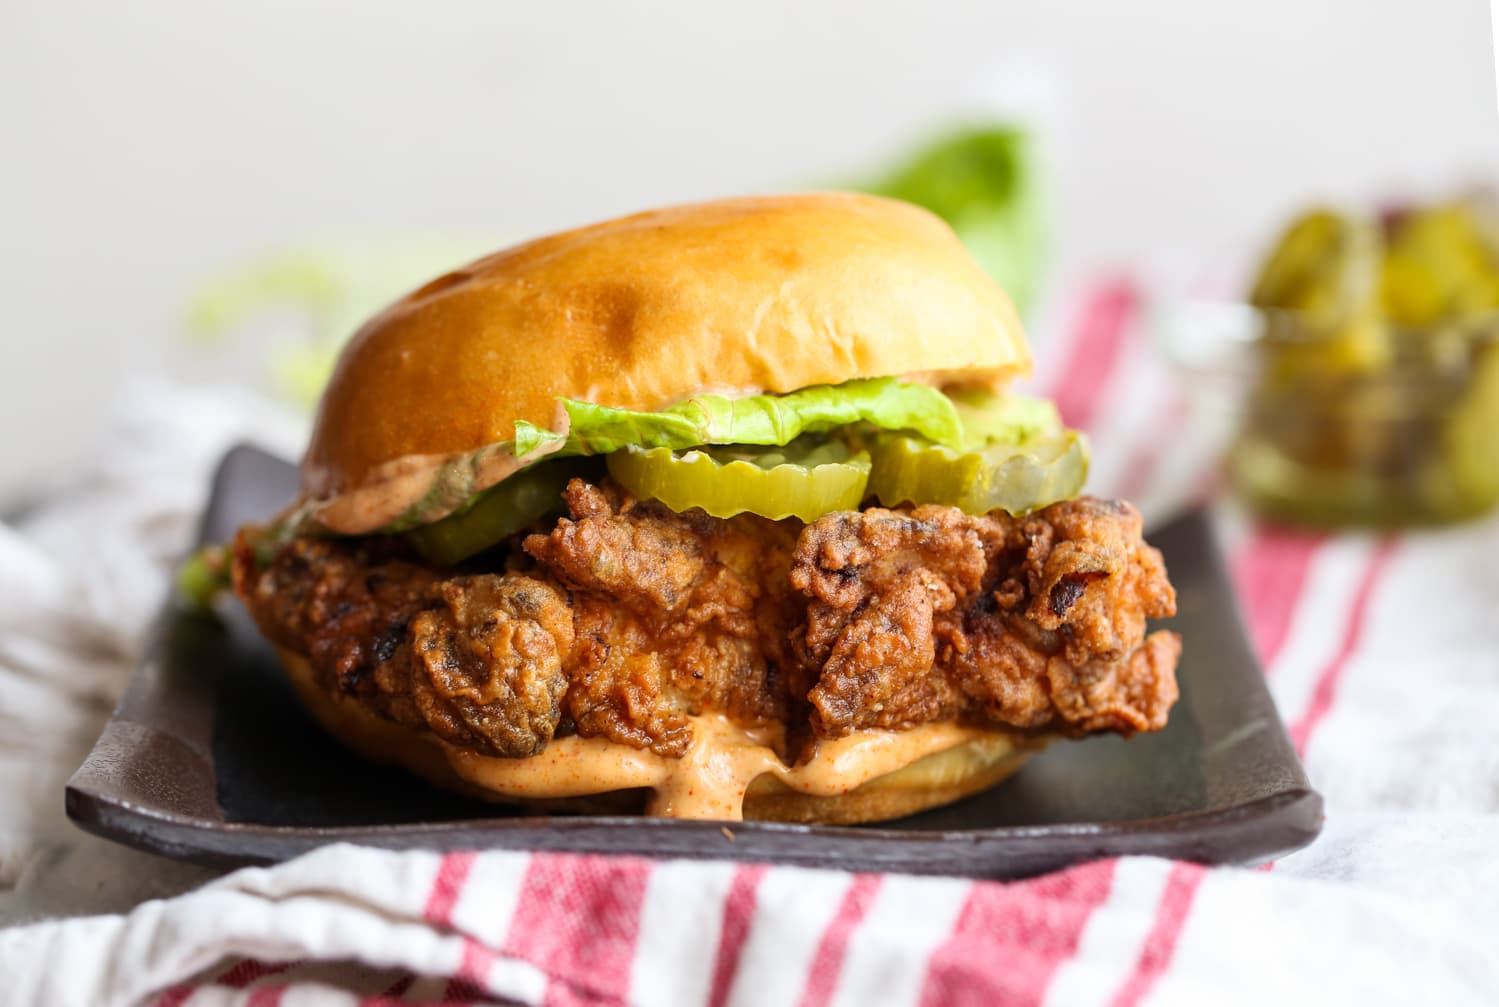 Fried chicken sandwich with pickles.